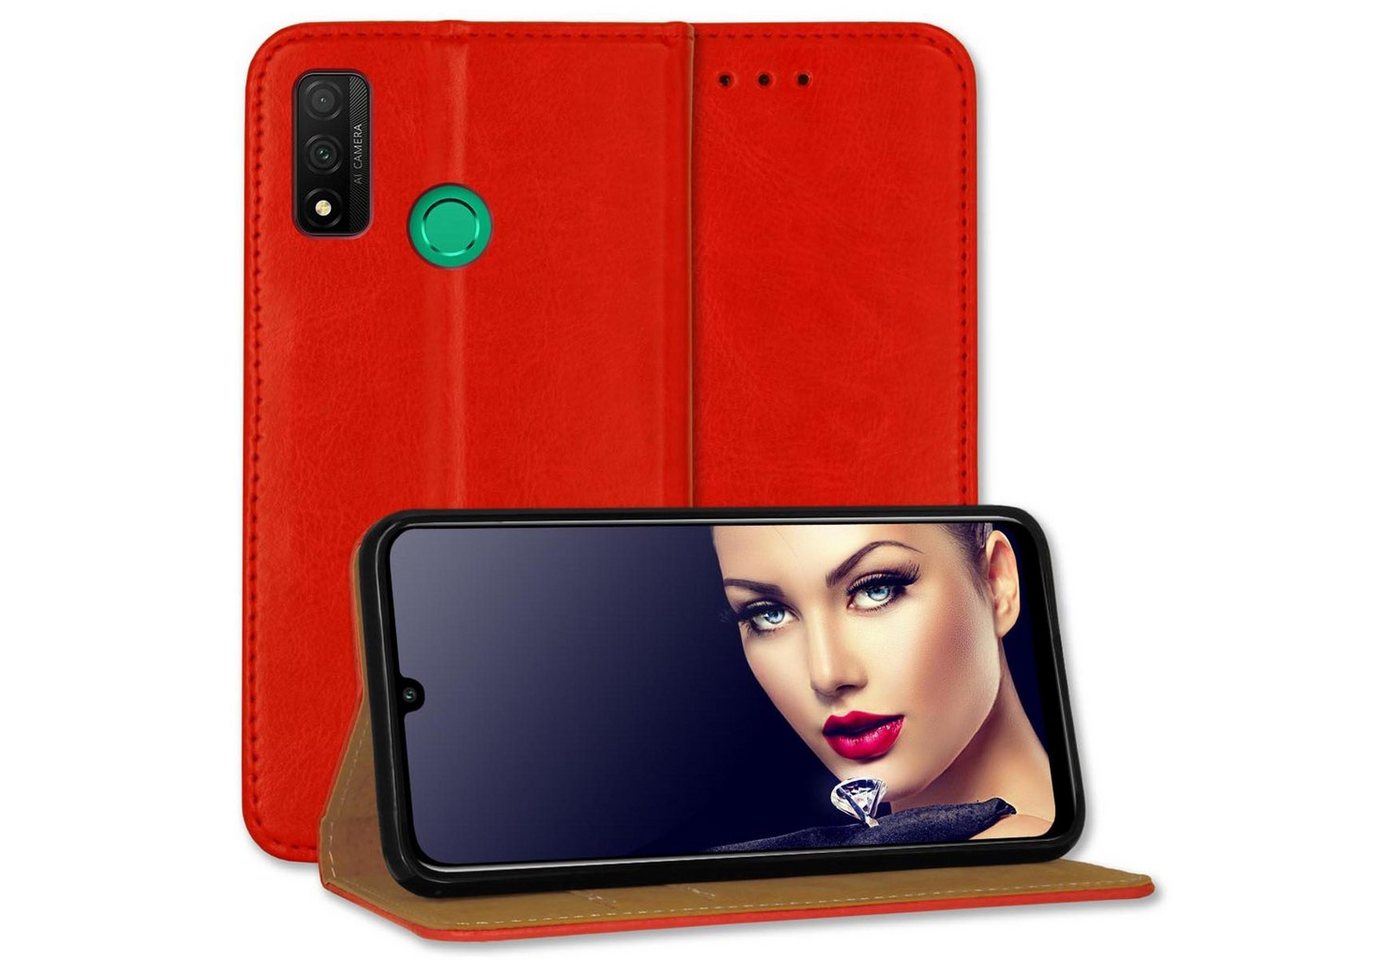 mtb more energy Smartphone-Hülle Bookstyle Business - Farbe rot, für: Huawei P Smart 2020 (6.21) von mtb more energy